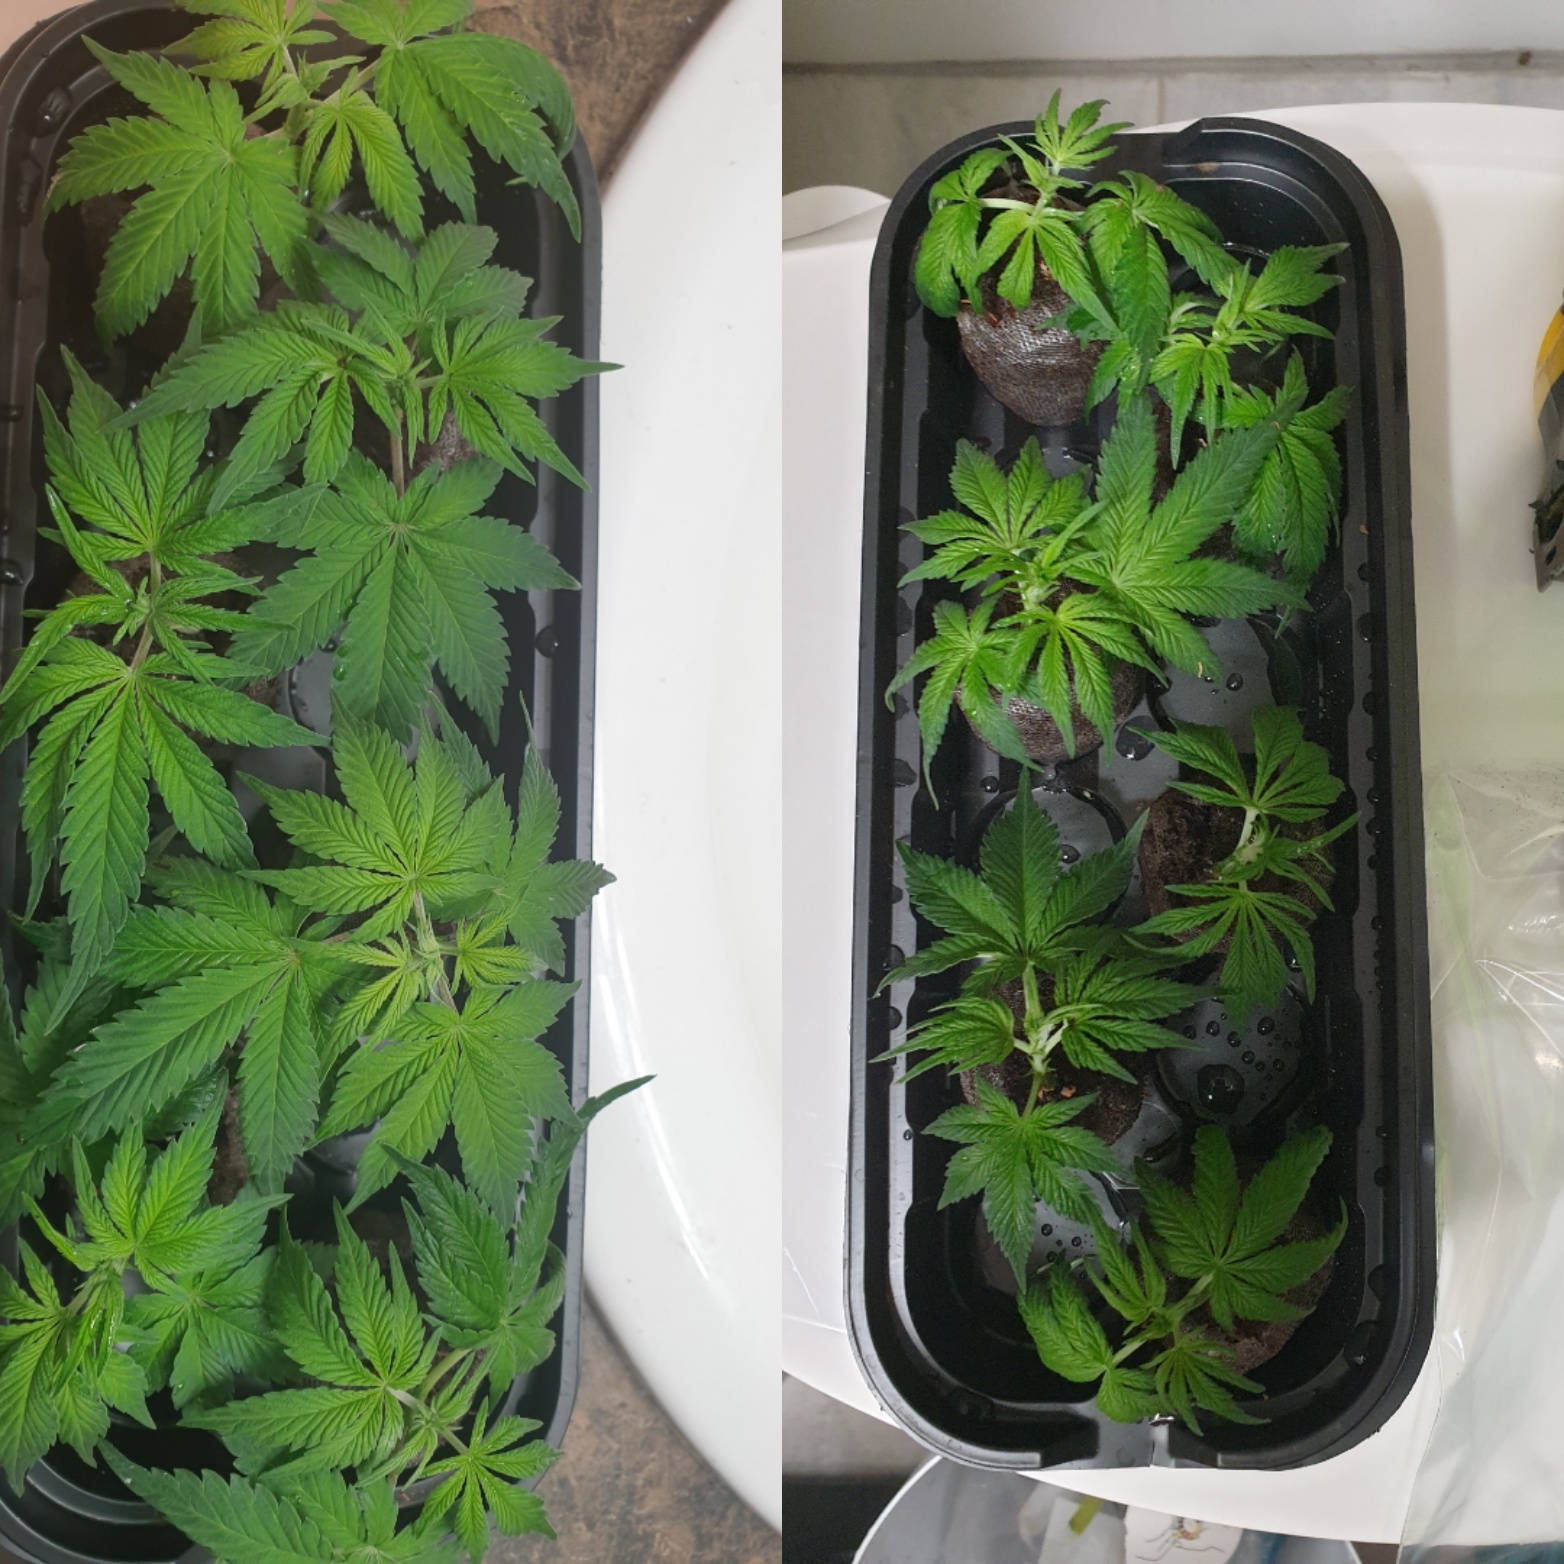 First cloning attempt with small clones